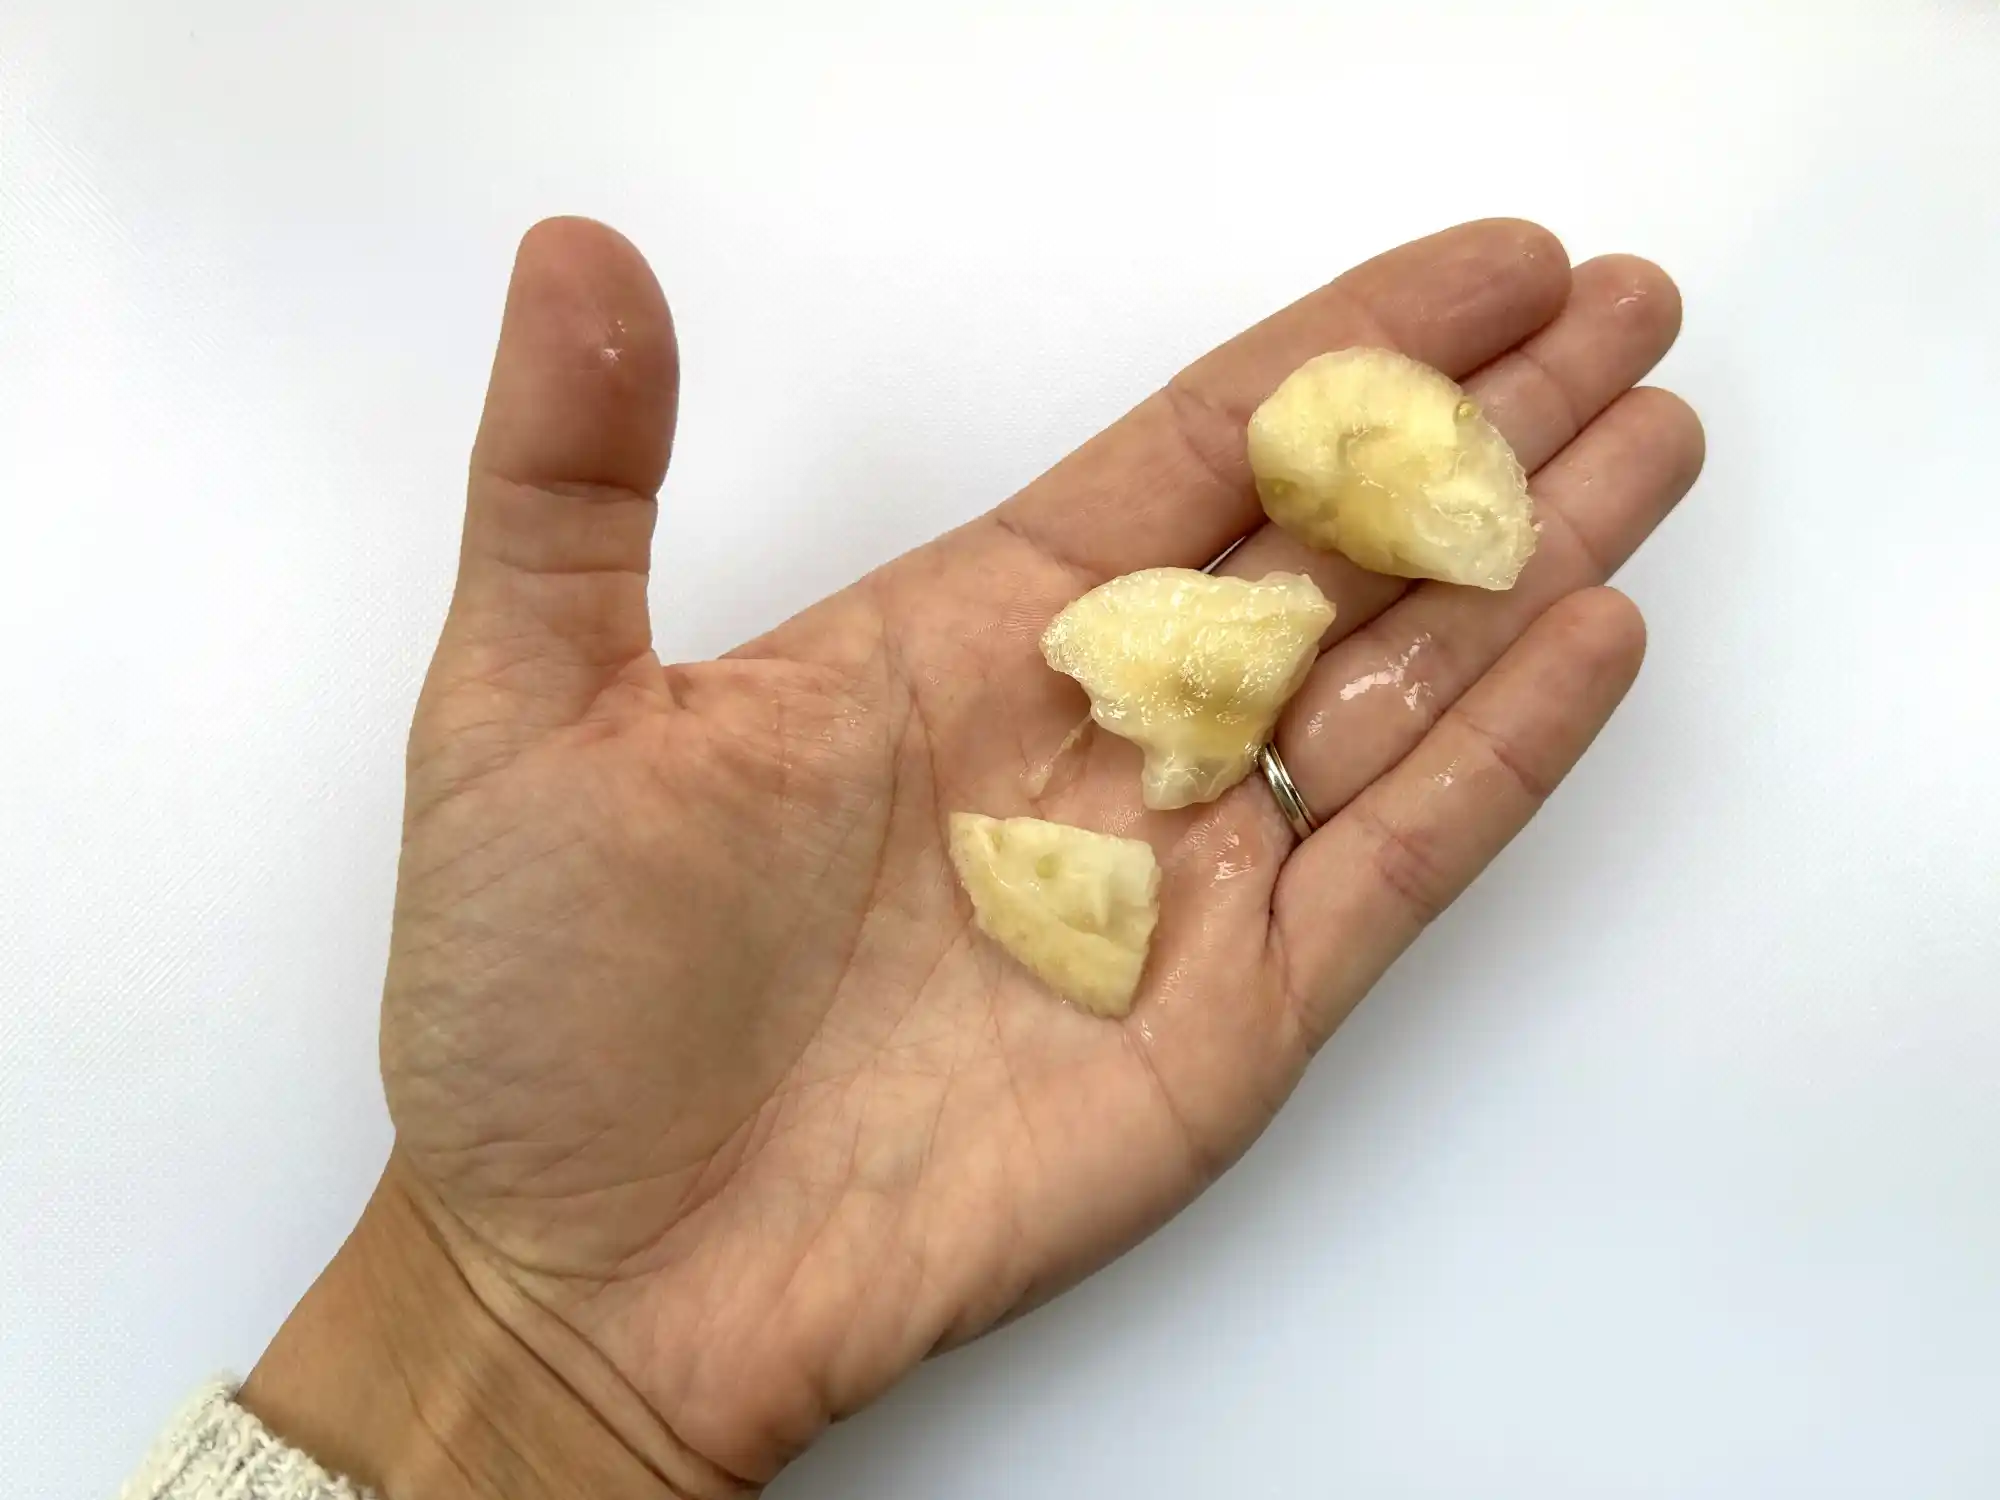 a photograph of a hand holding three bite-sized pieces of ripe feijoa